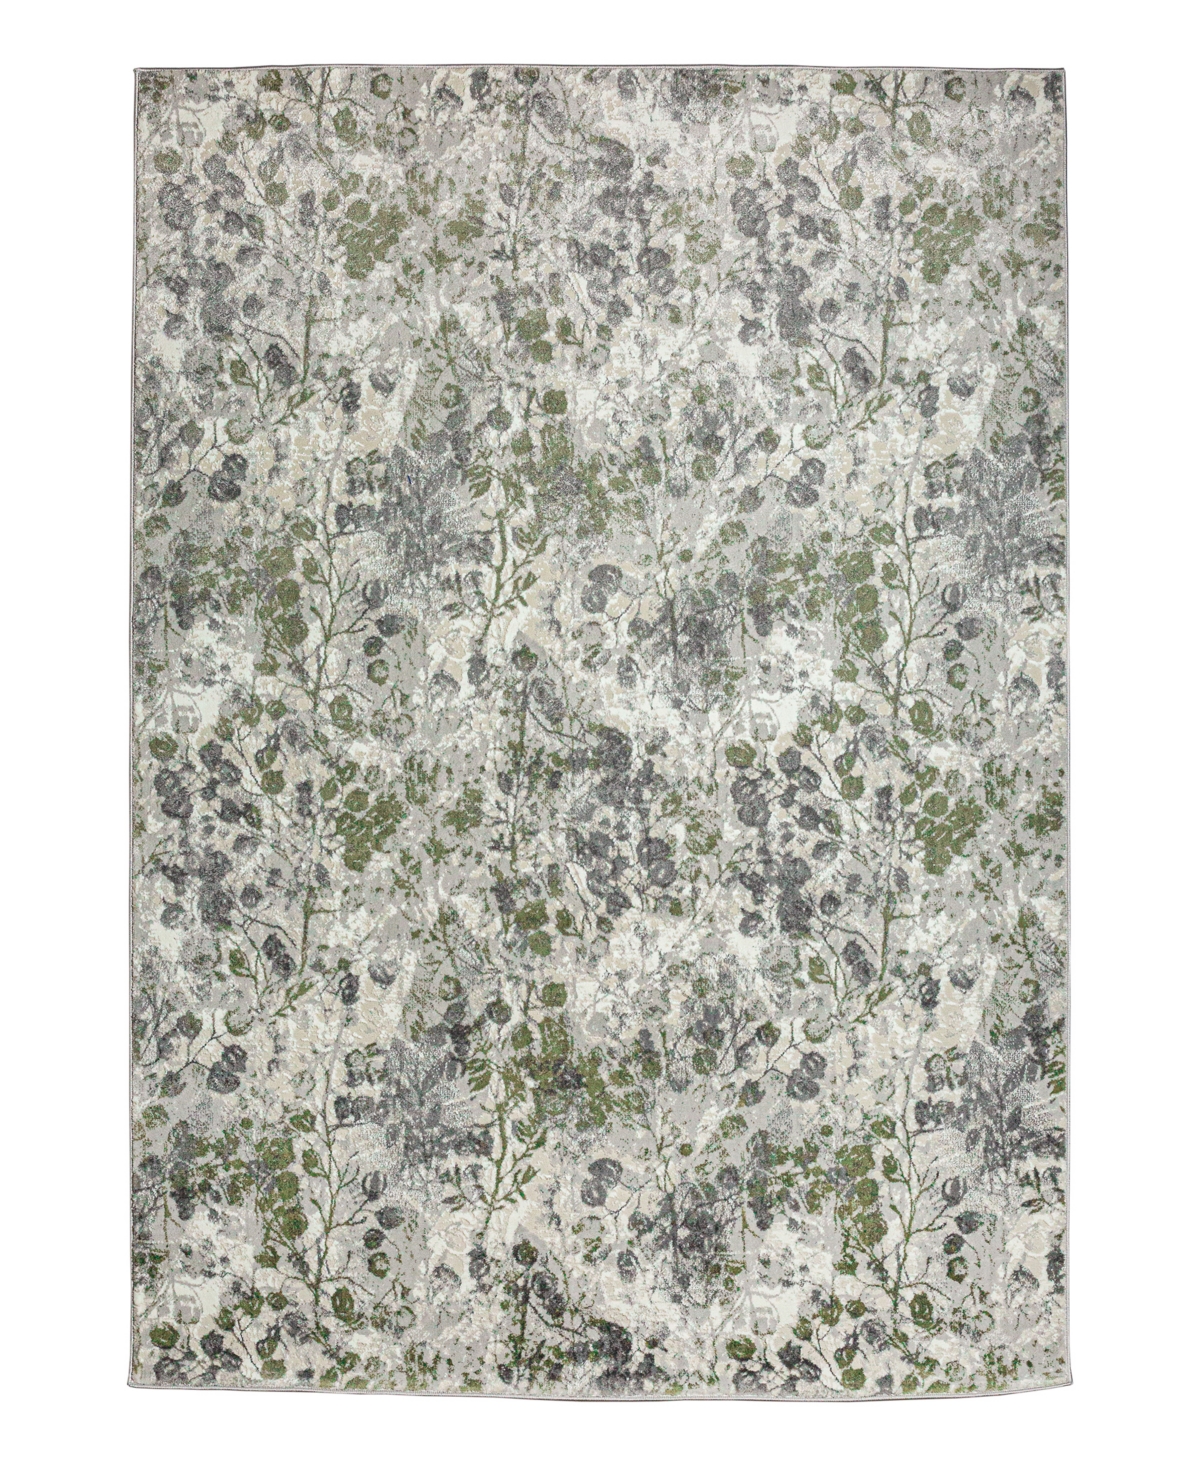 Km Home Teola 1242 5'3in x 7'3in Area Rug - Green